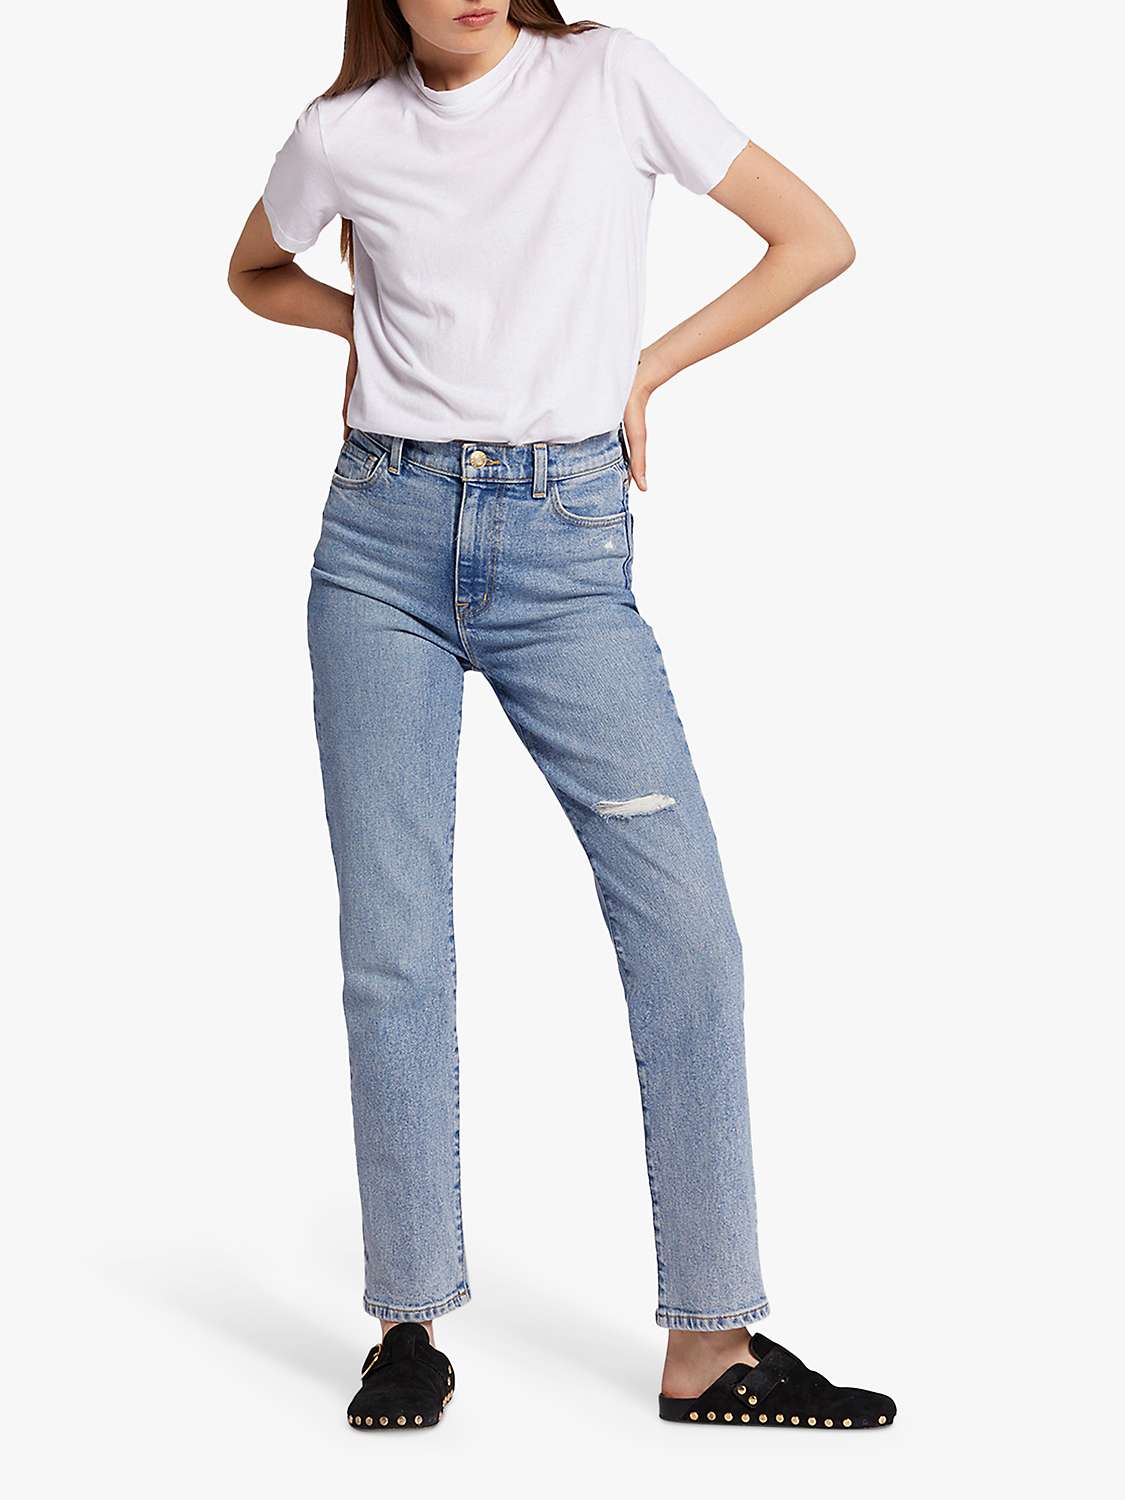 Buy Current/Elliott The Soulmate High Rise Slim Straight Distressed Jeans, Camino Light Blue Online at johnlewis.com